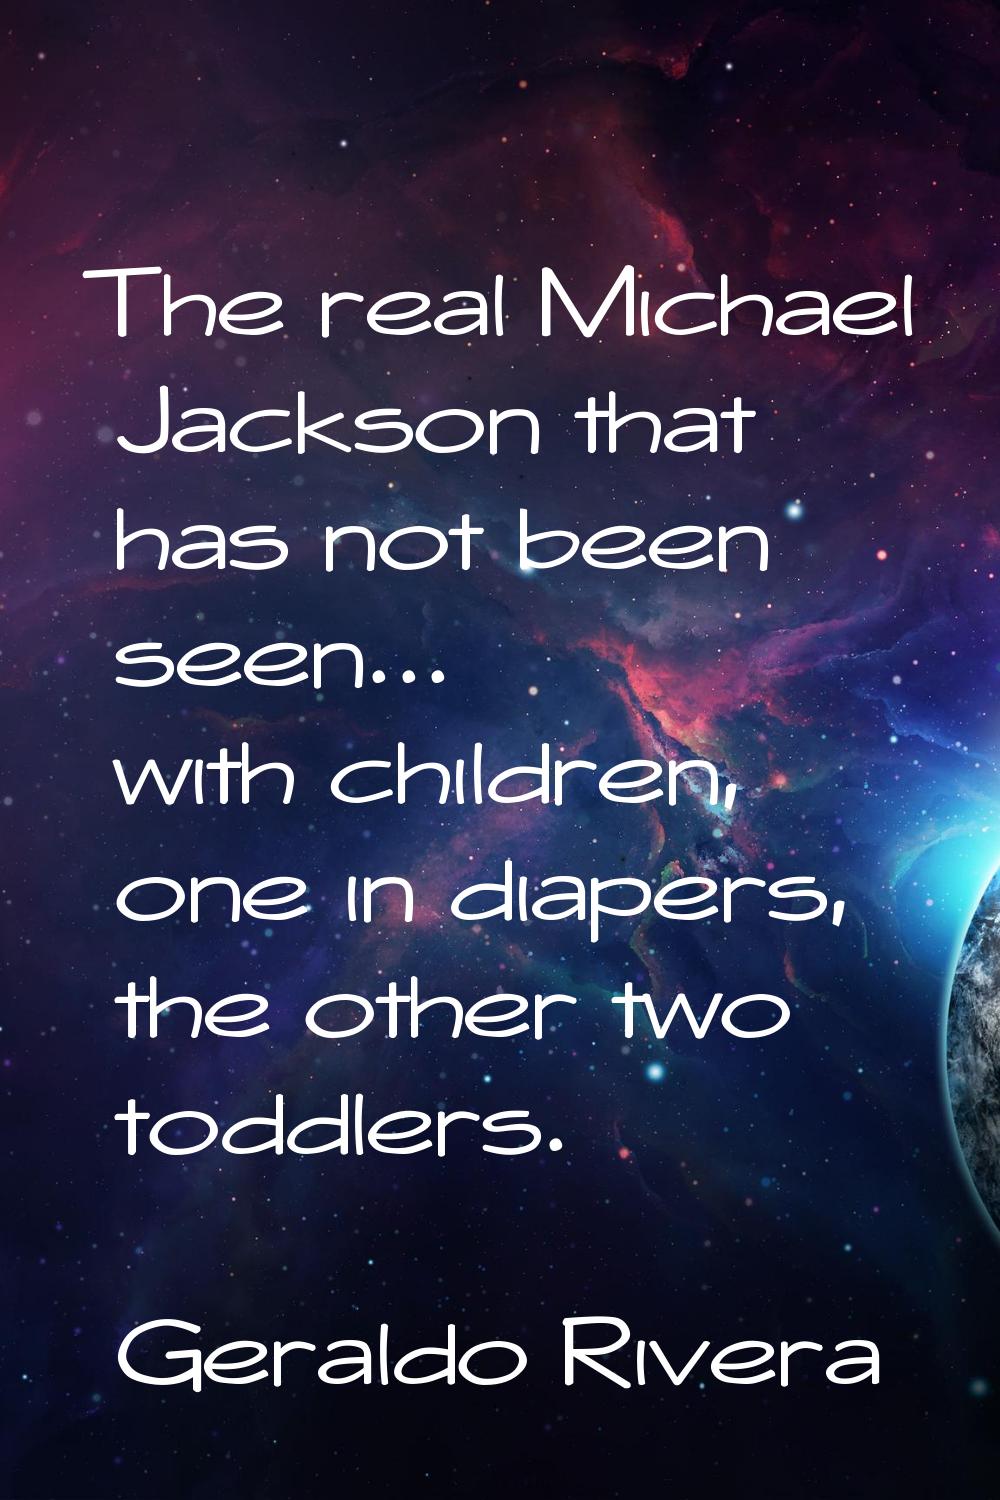 The real Michael Jackson that has not been seen... with children, one in diapers, the other two tod